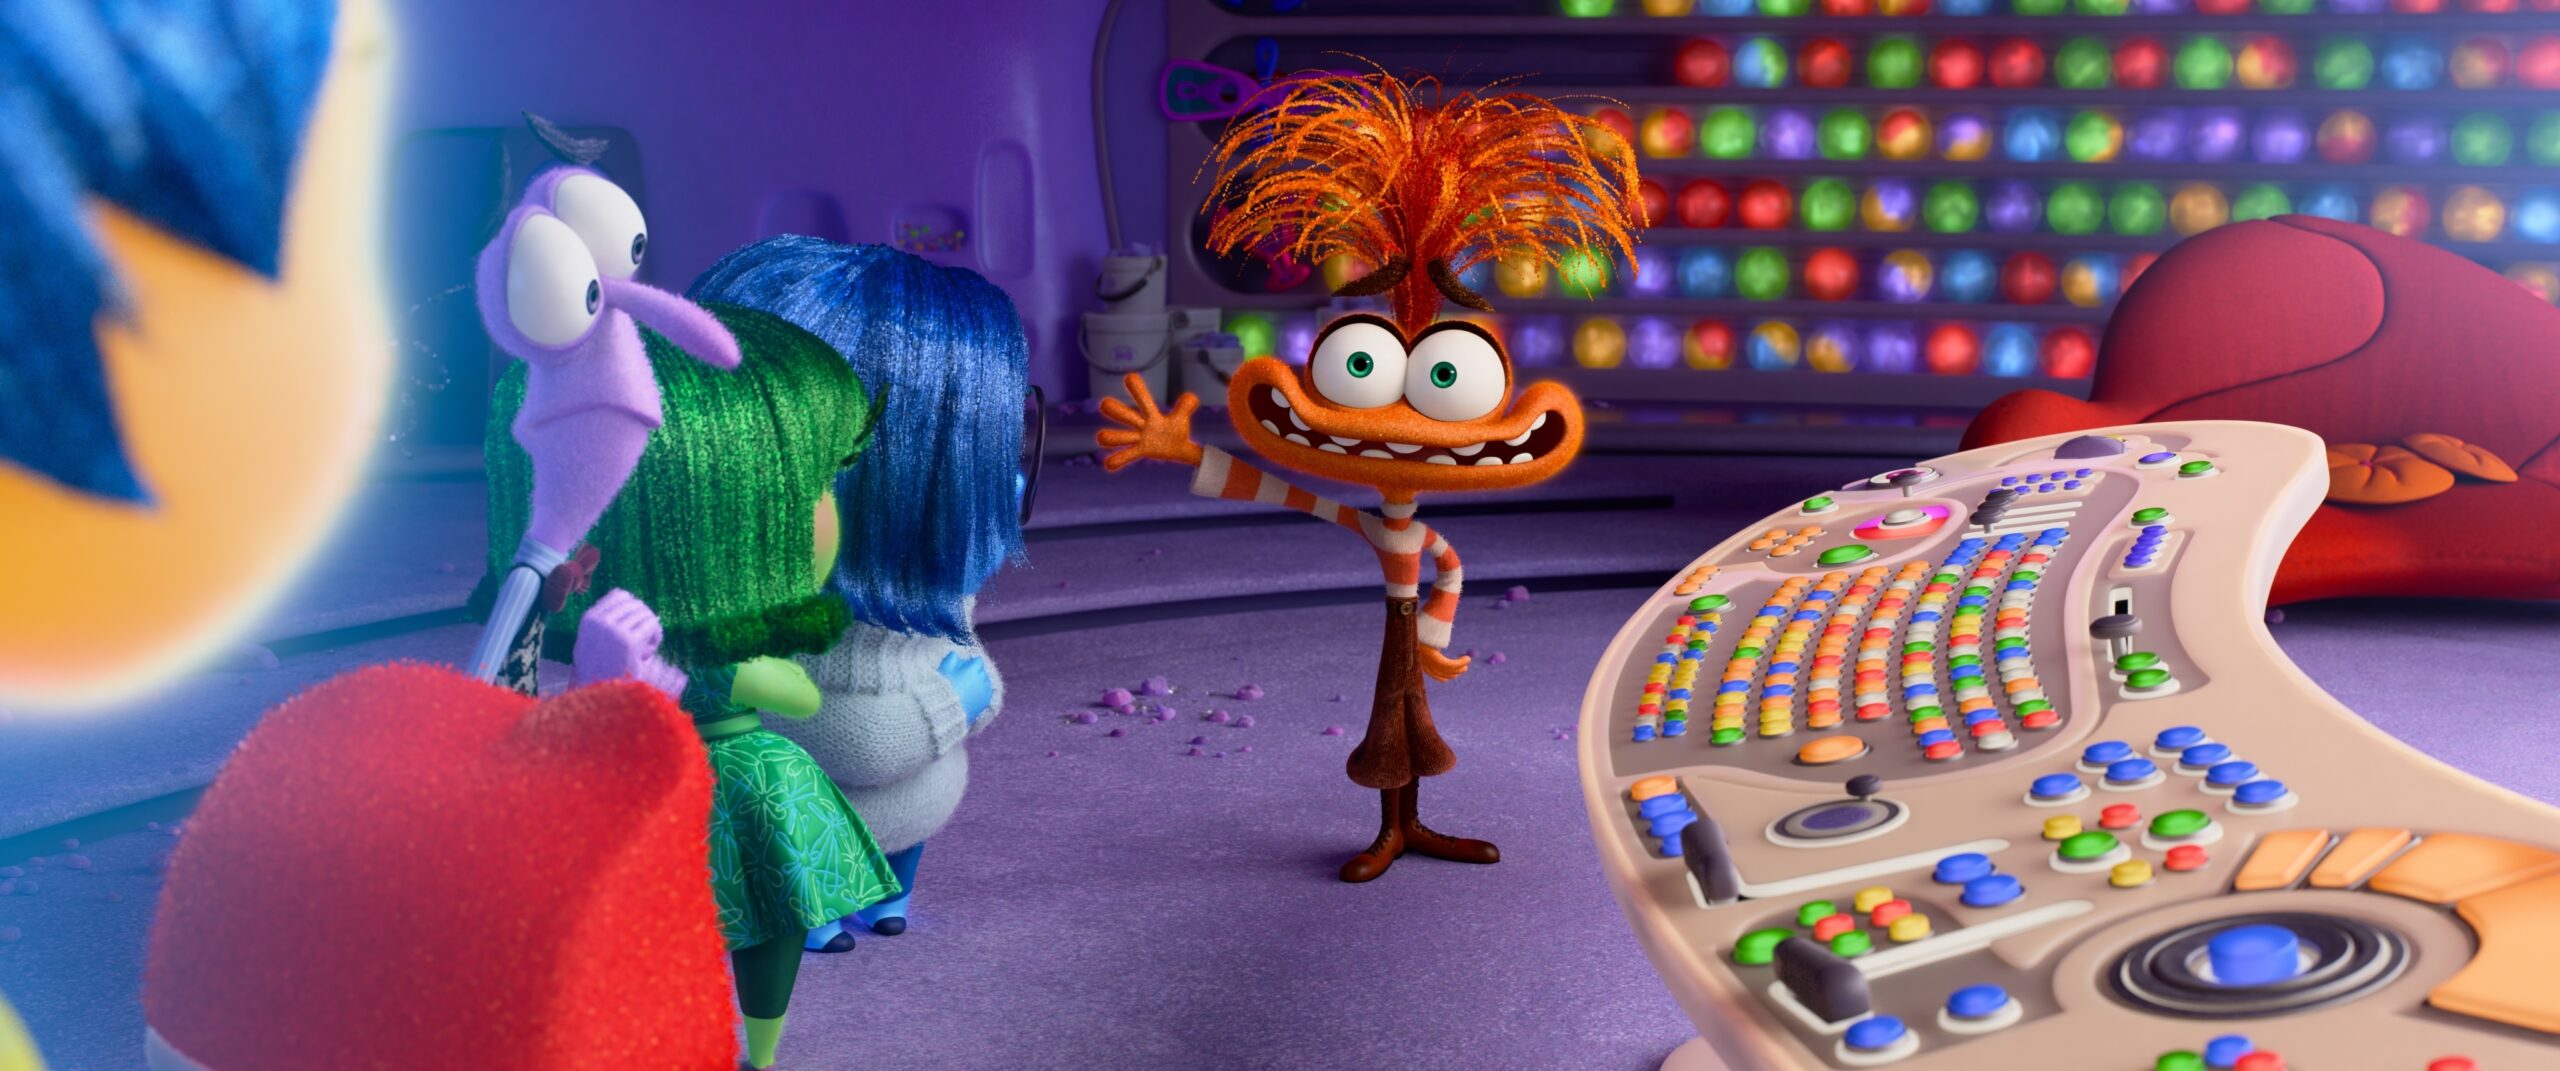 'Inside Out 2' Editor On Creating 'Special Moments' In The Upcoming Disney/Pixar Film